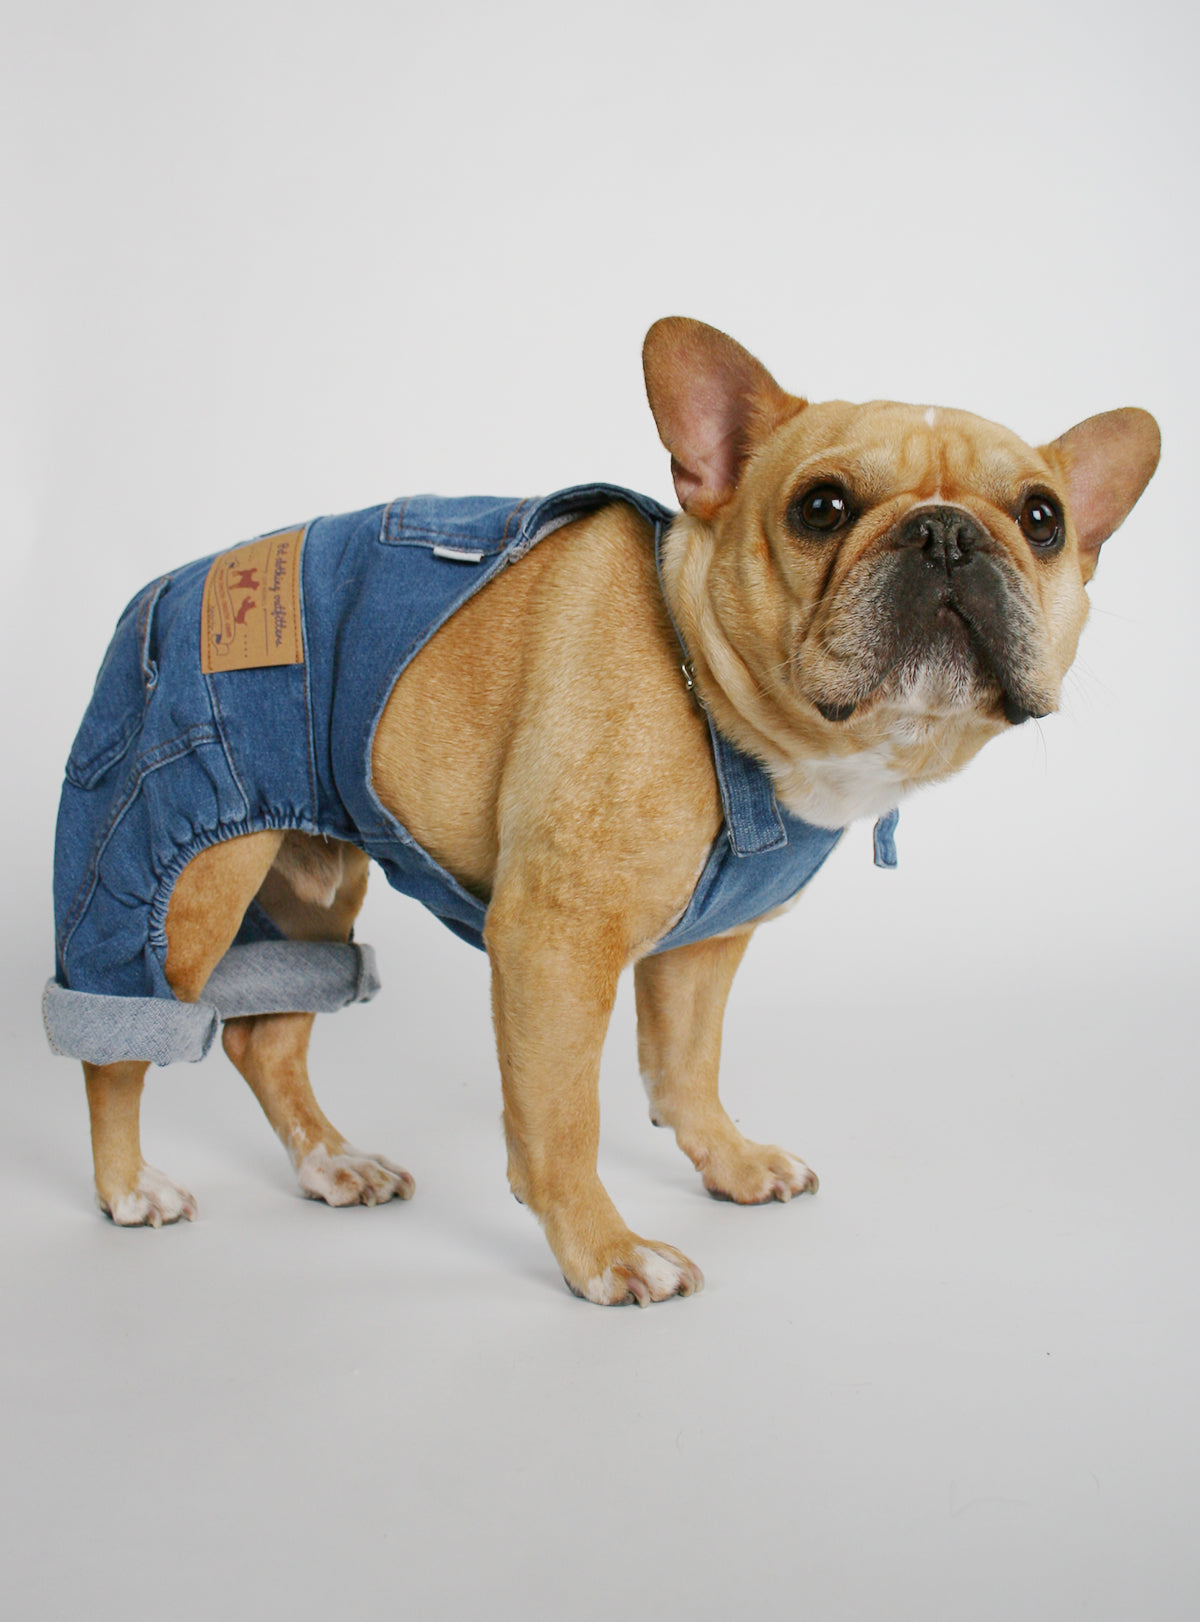 Lulala Dog Dress One Shoulder Autumn Dog Denim Jeans with Pocket-Dog  Outfits Pet Pretty Off Shoulder Dress for Dogs-Comfortable and Casual Teddy  Dog Clothes Skirt with Belt Bib Overalls(M,Sea Green) : Amazon.in: